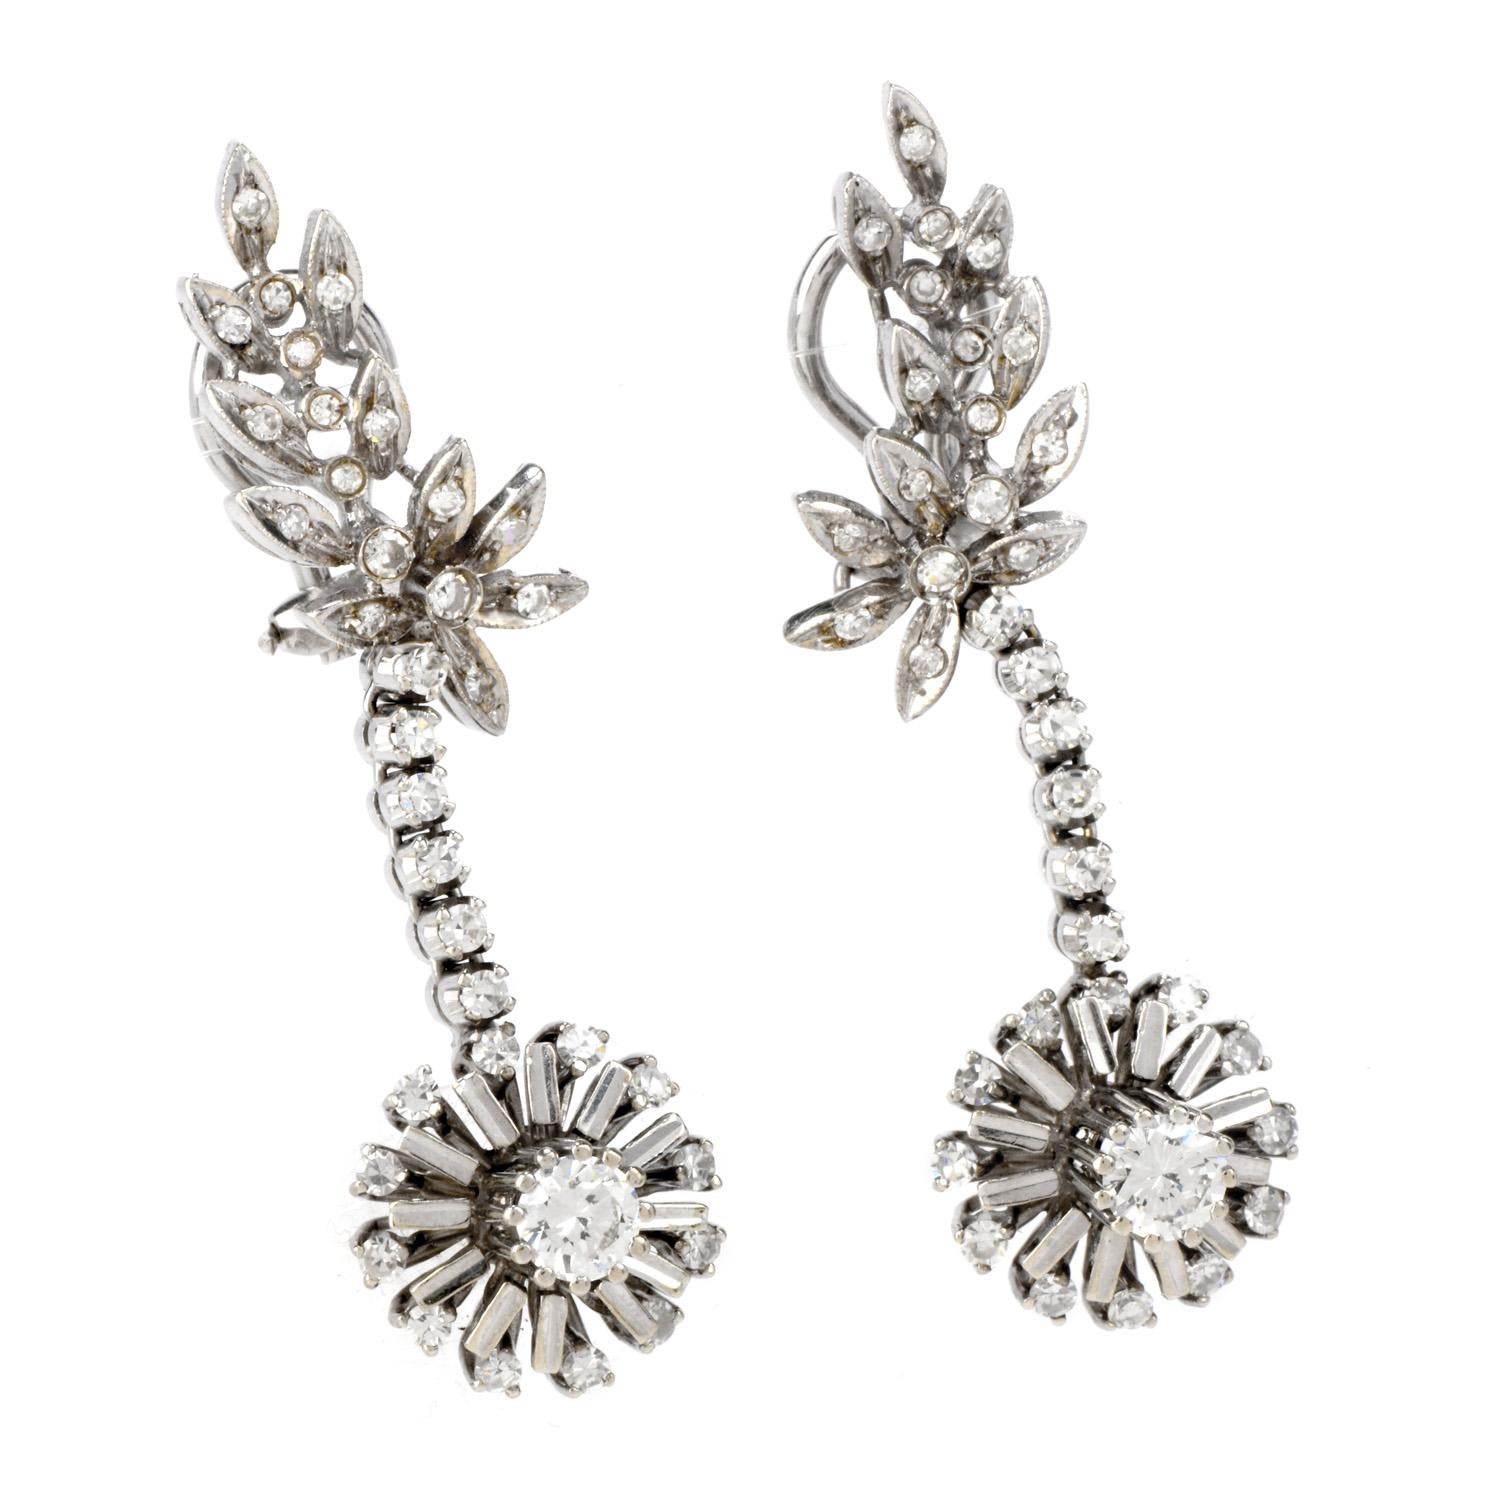 These Vintage platinum diamond Earrings were inspired in a Dangling Chandelier Motif.

They centered with 2 larger size round European diamond weighing approx. 0.75 carats in total,

H-I color, VS clarity.
Total diamond weight is approx. 1.50 carat